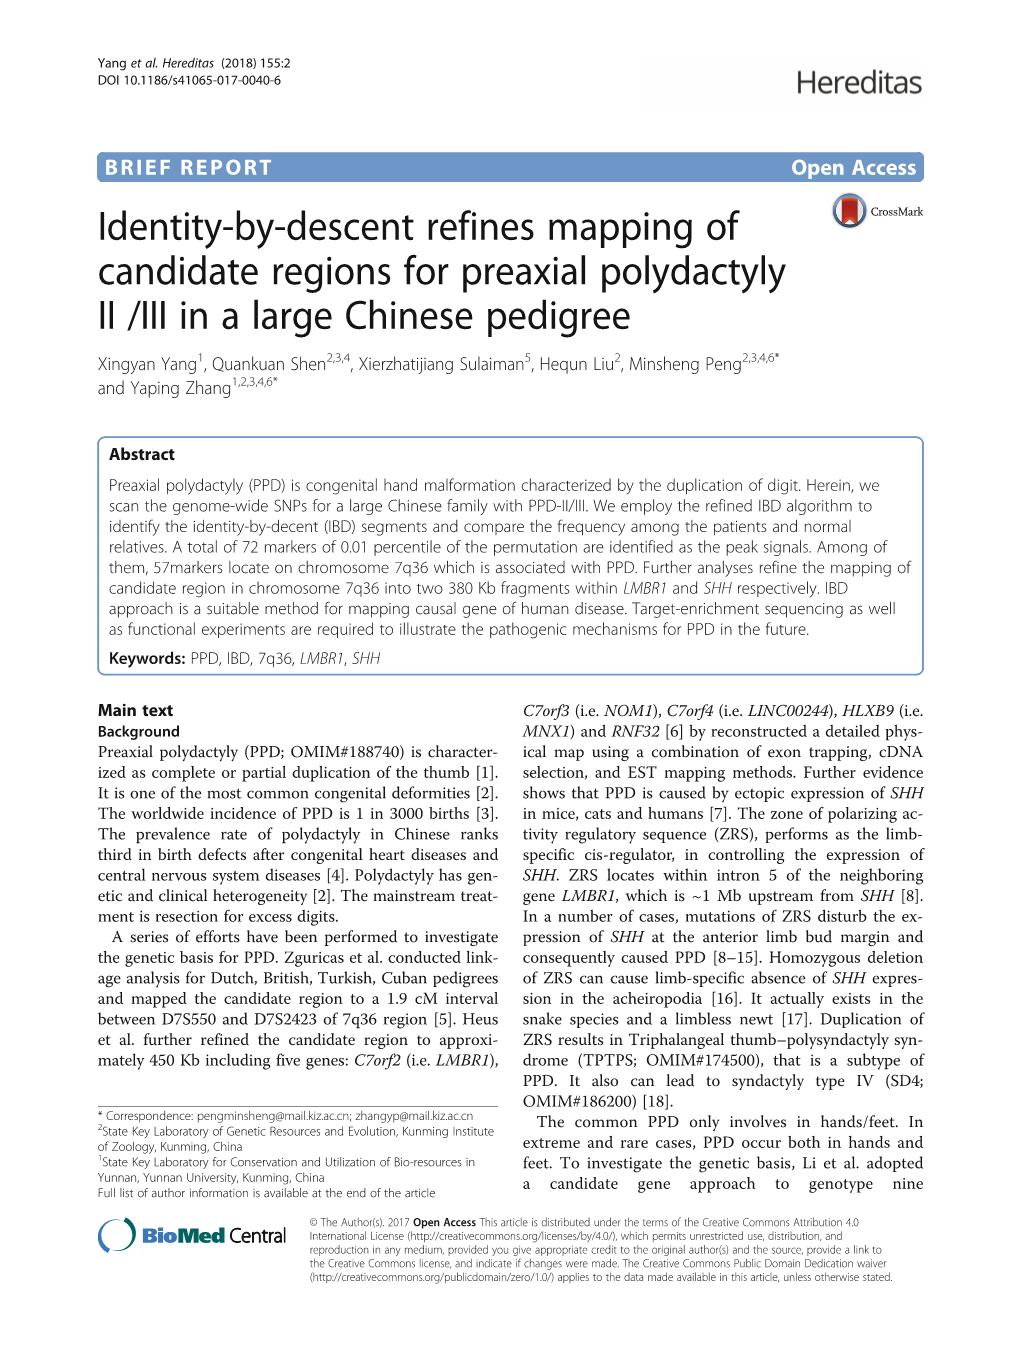 Identity-By-Descent Refines Mapping of Candidate Regions for Preaxial Polydactyly II /III in a Large Chinese Pedigree